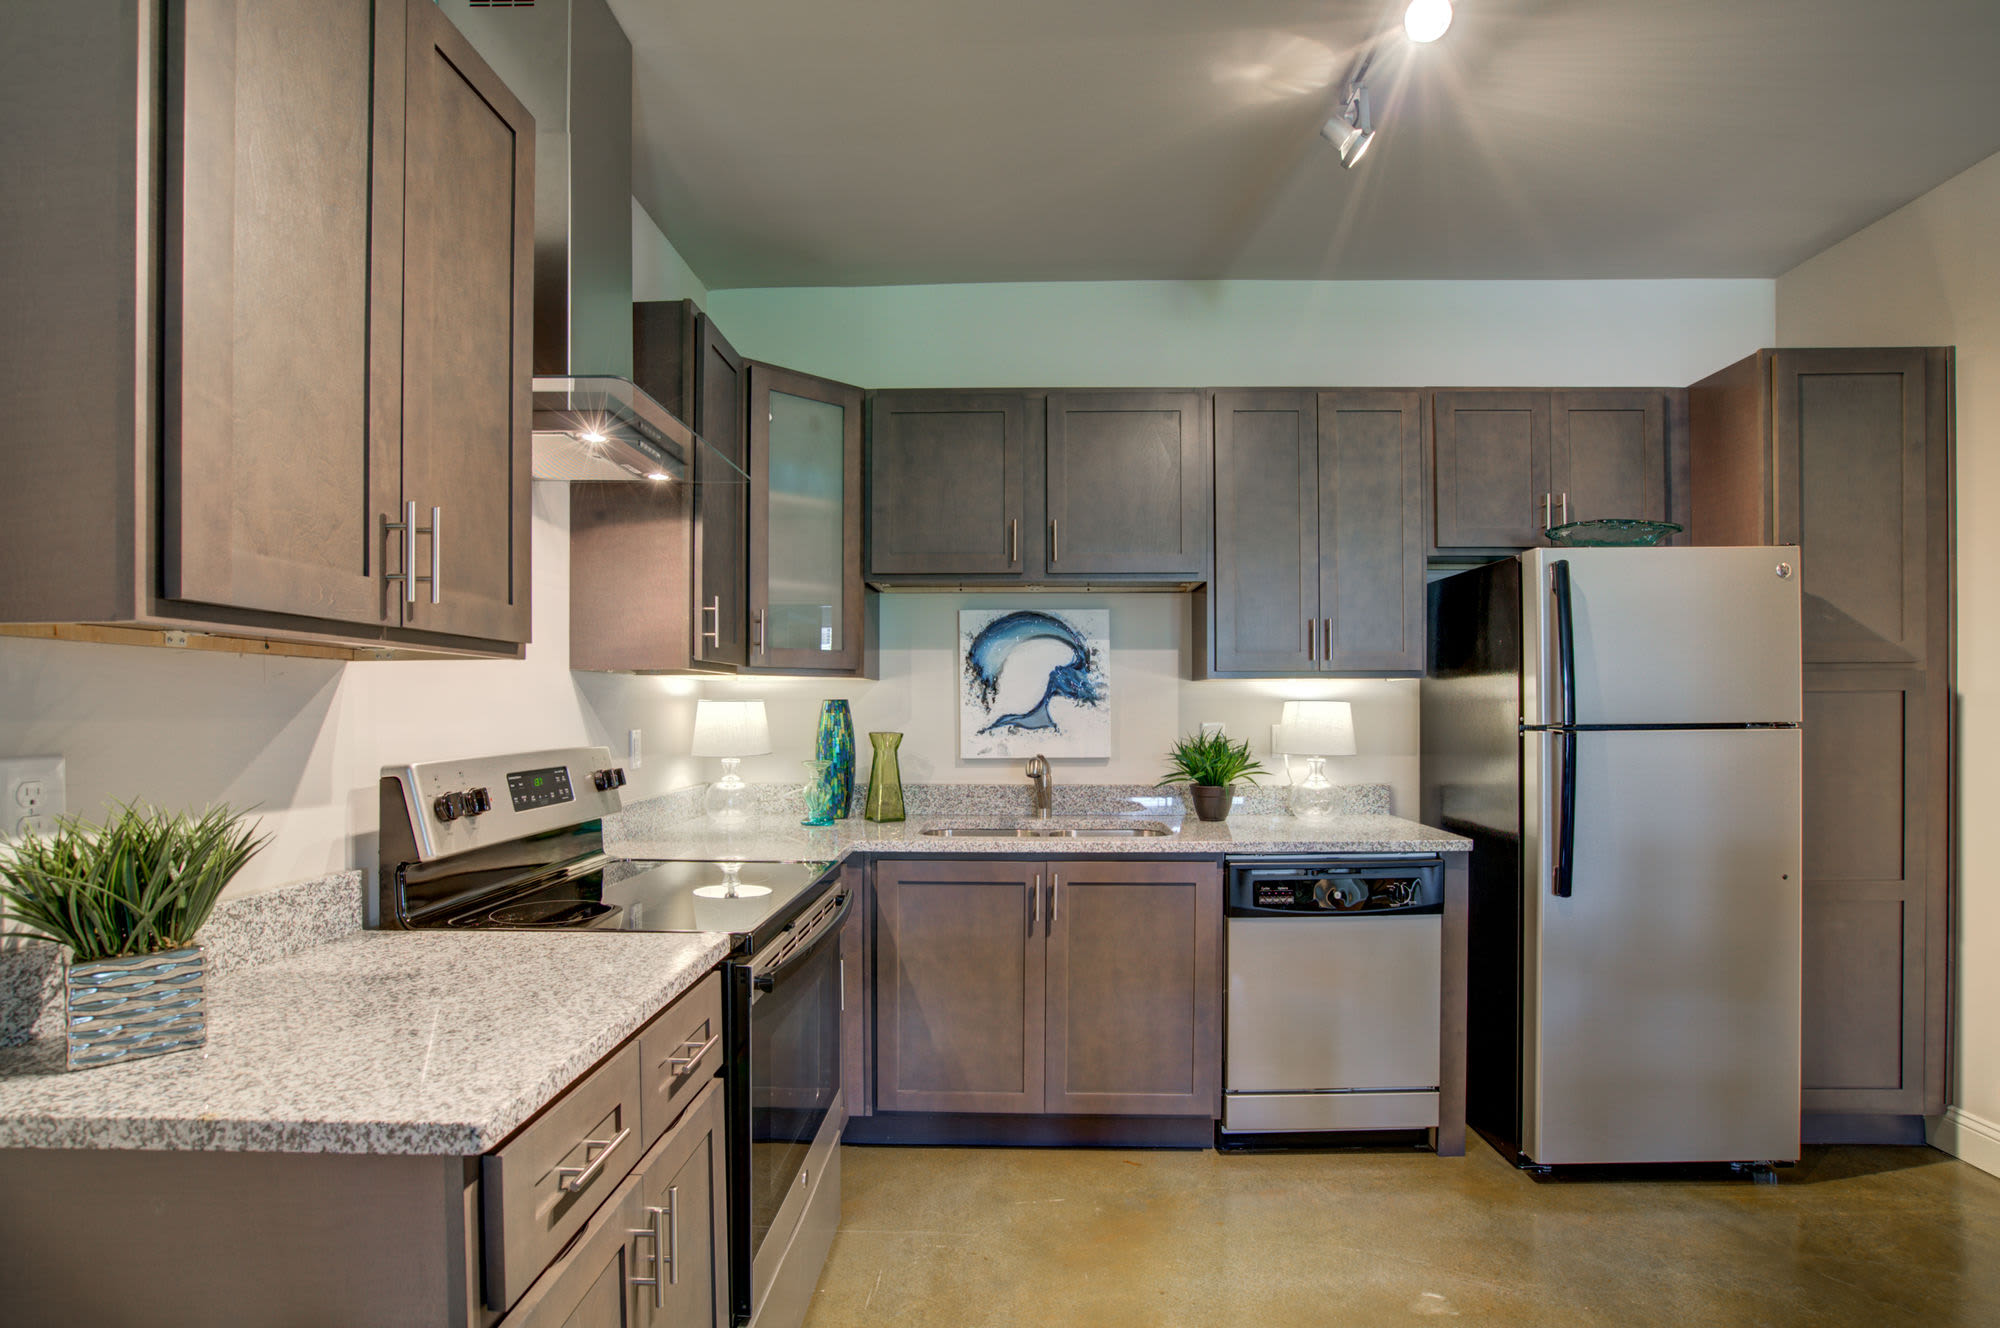 Stainless steel refrigerator and range at Beckstone Apartments in Summerville, South Carolina